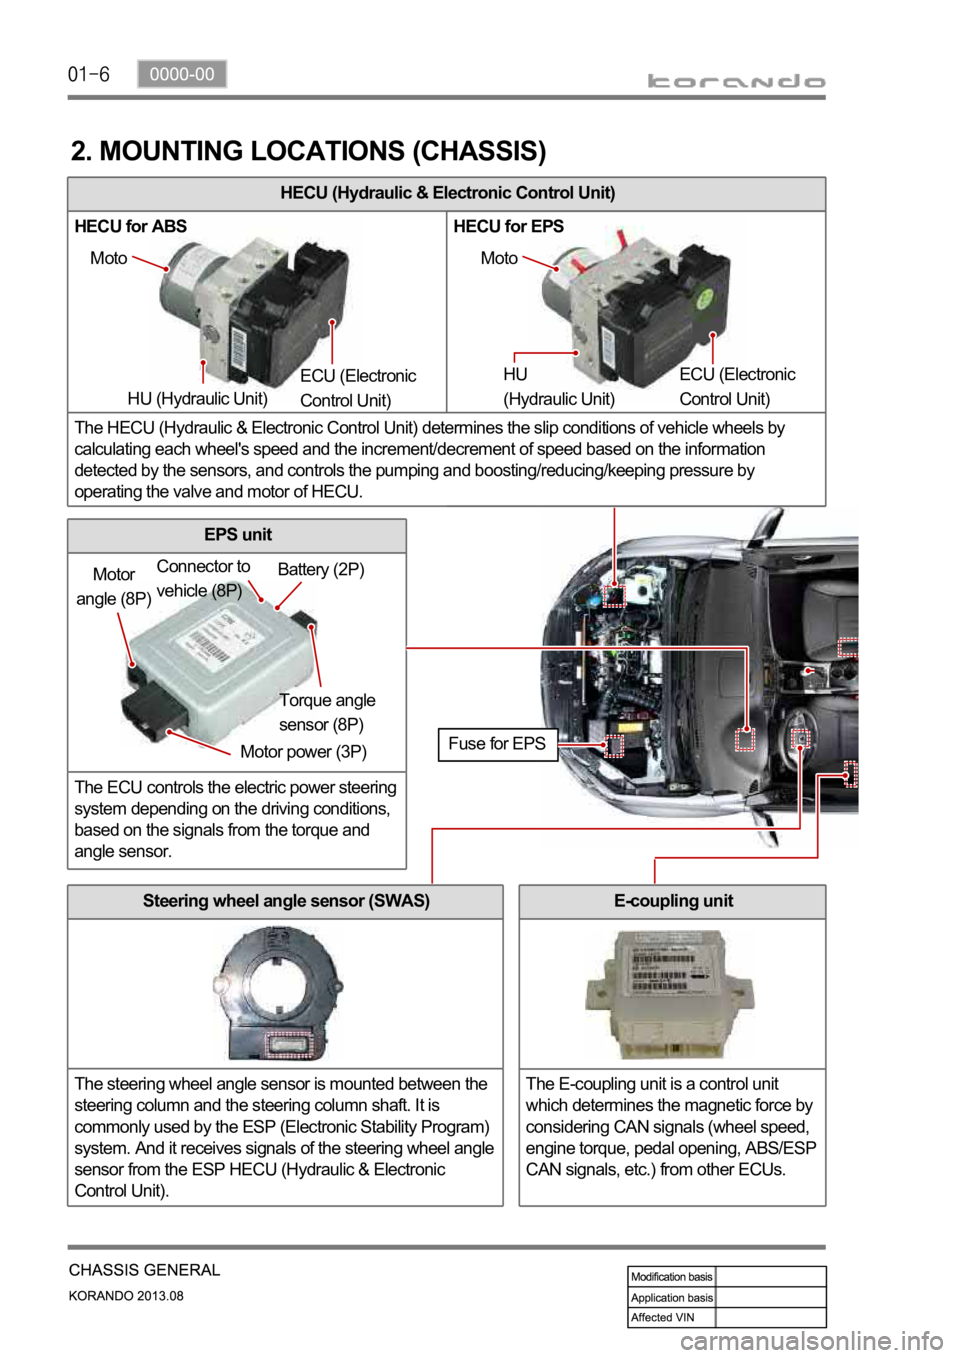 SSANGYONG KORANDO 2013 Owners Guide HECU (Hydraulic & Electronic Control Unit)
HECU for ABS HECU for EPS
The HECU (Hydraulic & Electronic Control Unit) determines the slip conditions of vehicle wheels by 
calculating each wheel's sp